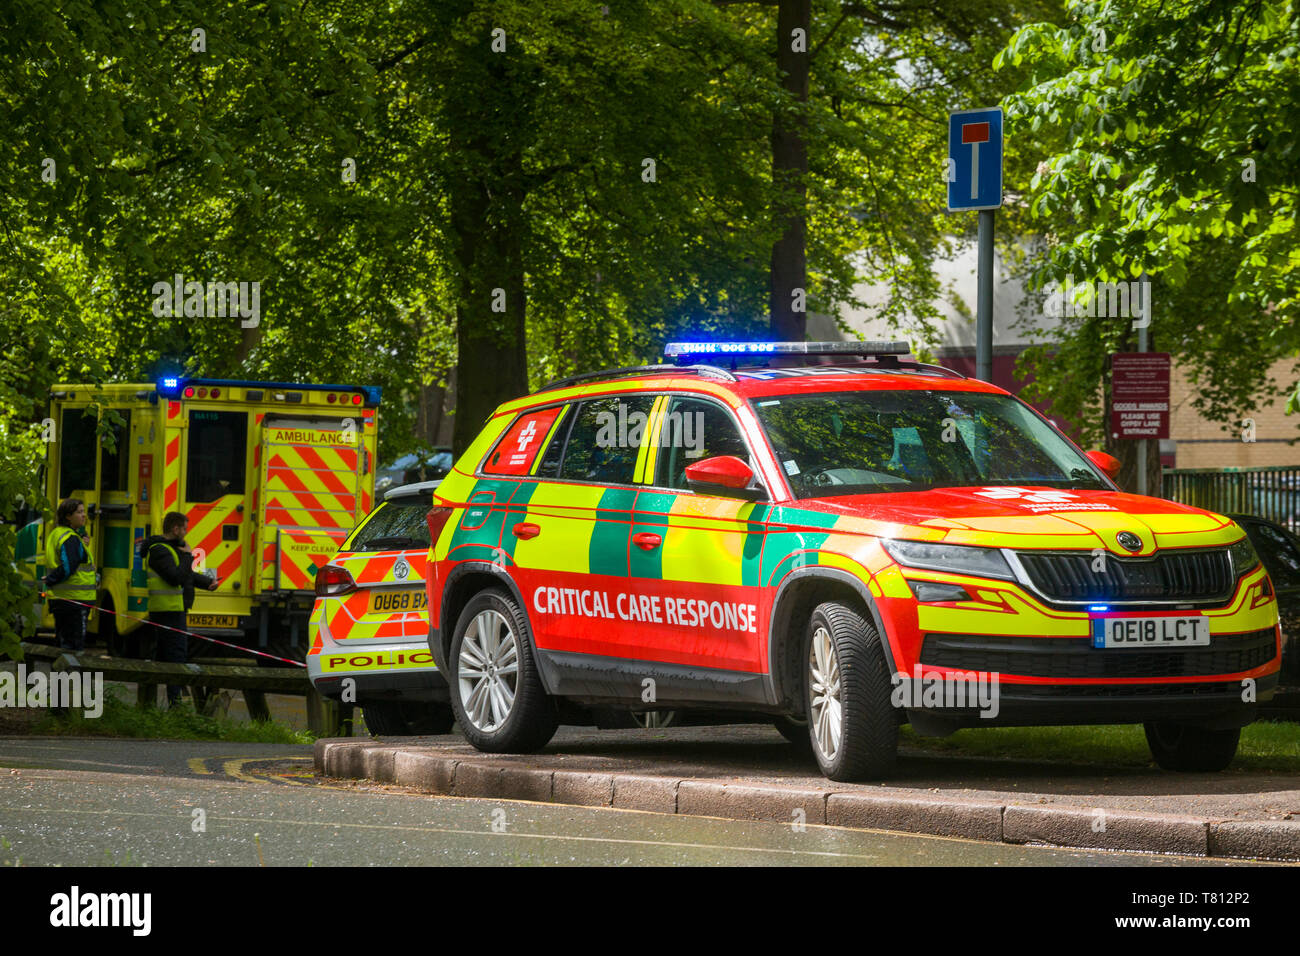 A Critical Care Response Vehicle from Thames Valley Air Ambulance at an incident in Oxford with a police car and ambulance behind. Stock Photo